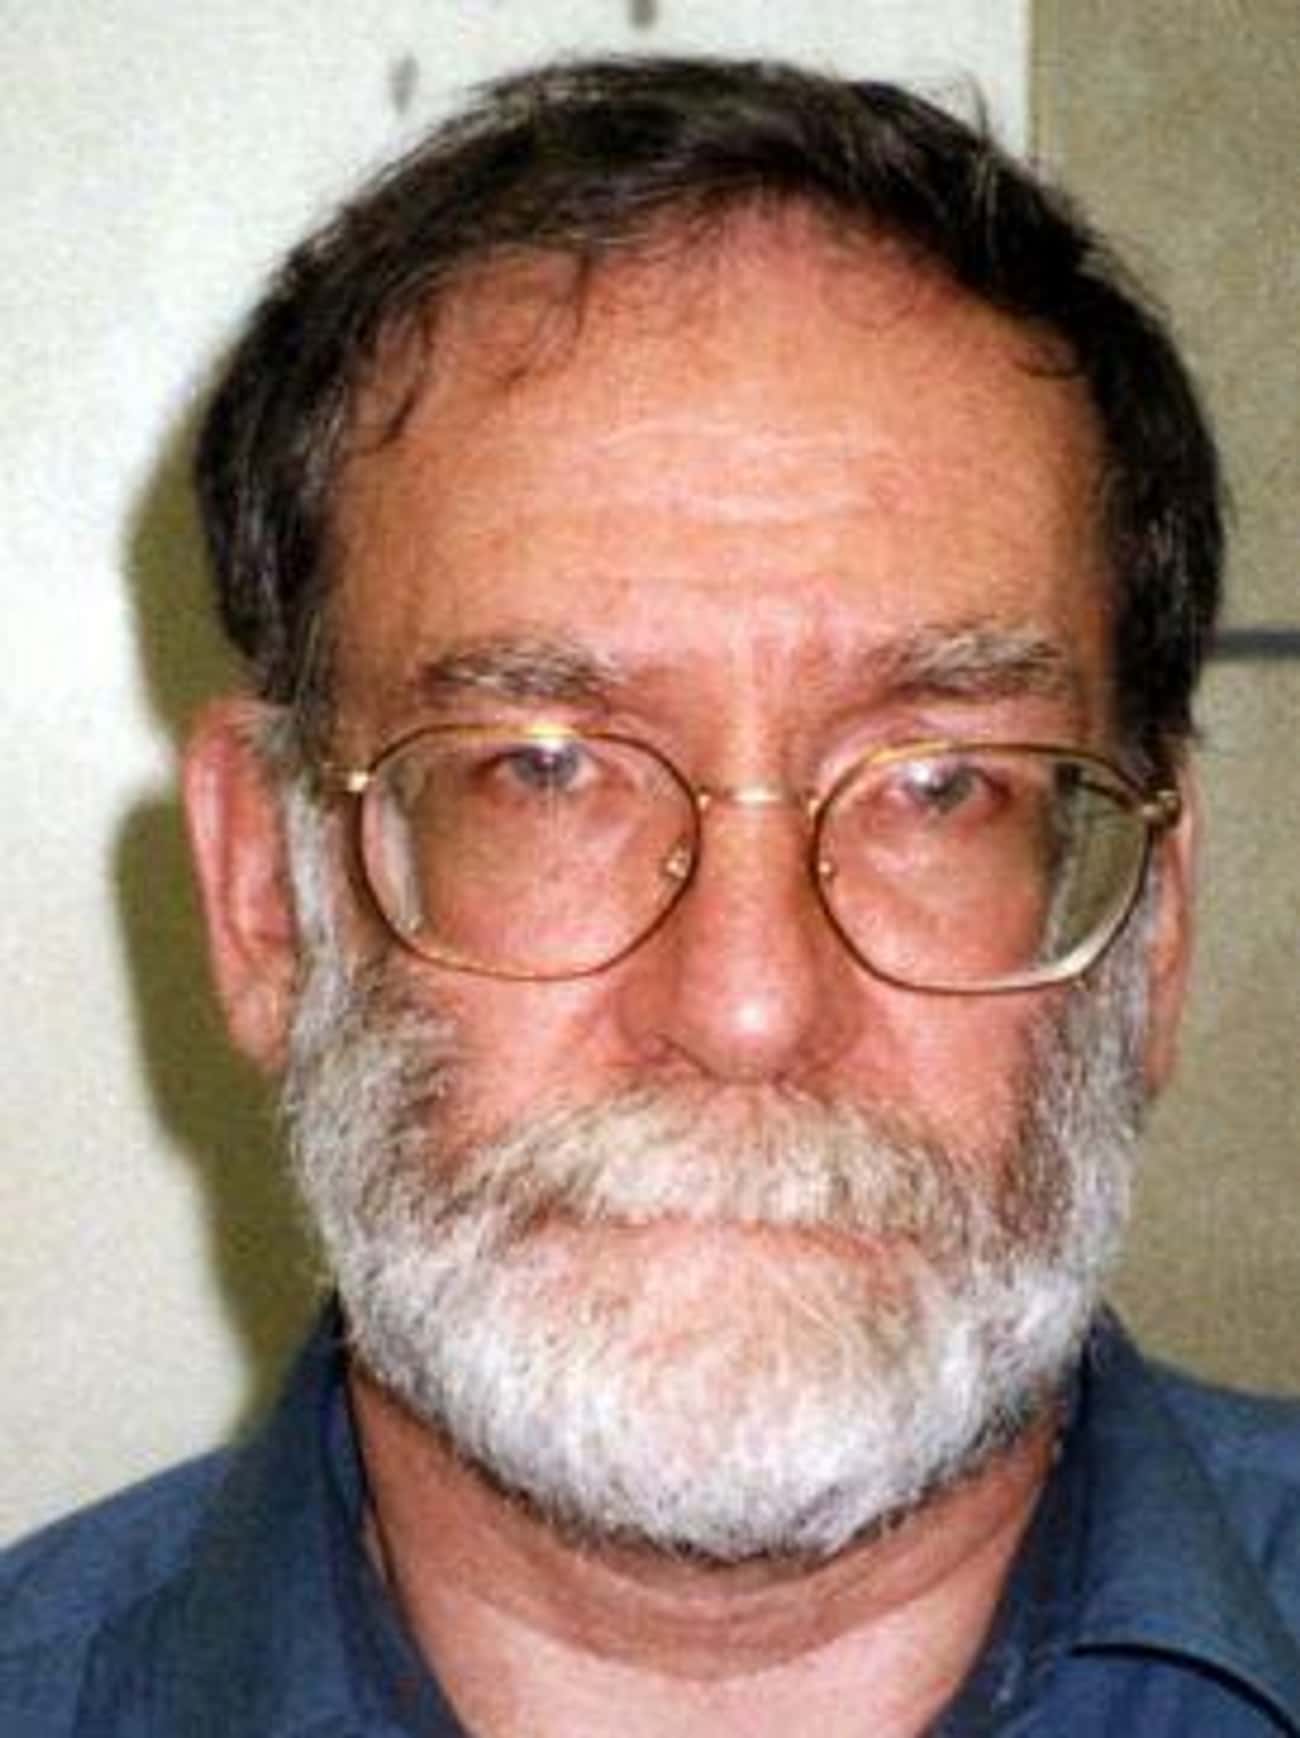 After Harold Shipman Put Himself In His Victim's Will, The Family Got Suspicious